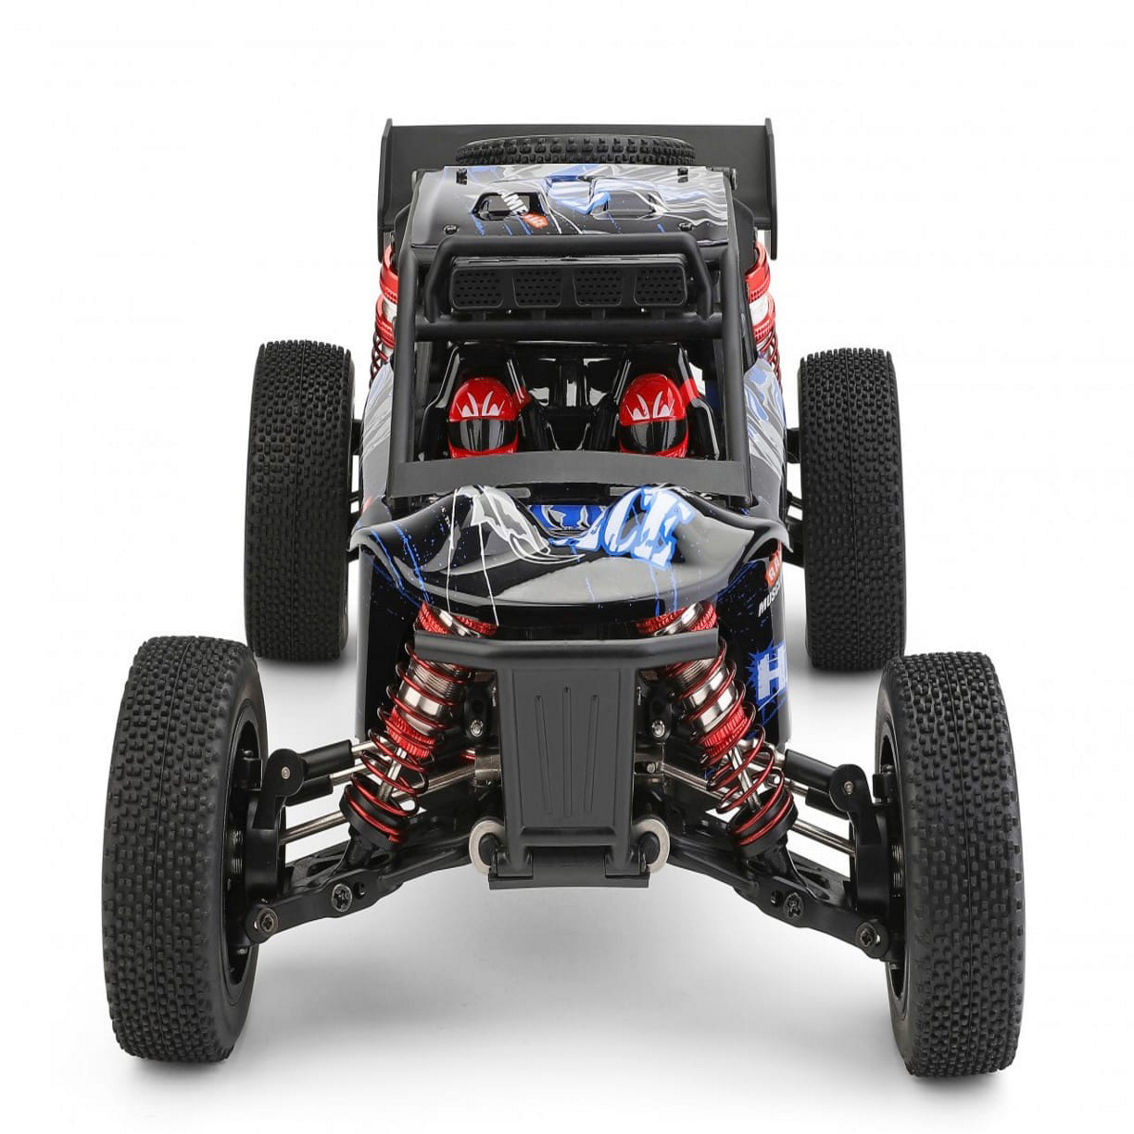 CIS-124018 1:12 scale monster truck 4WD - Image 5 of 5